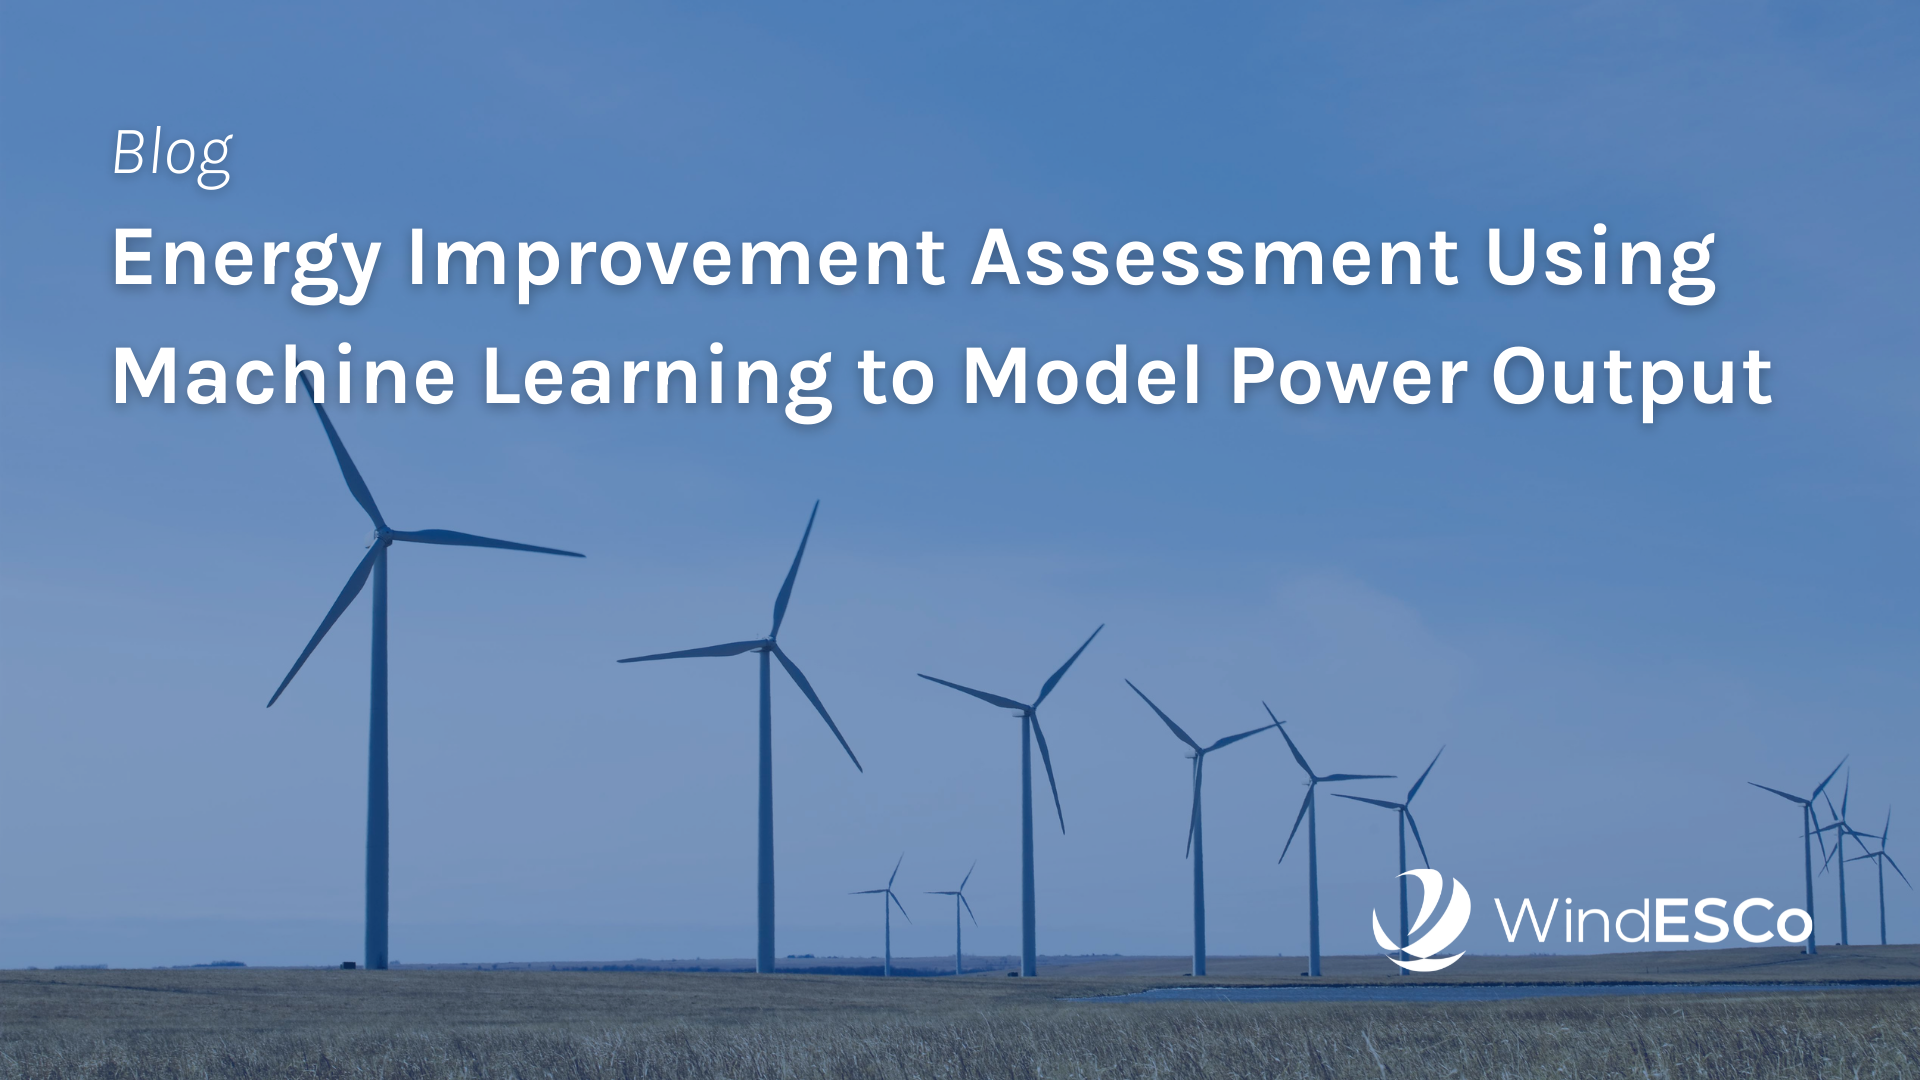 Energy Improvement Assessment: Machine Learning to Model Power Output